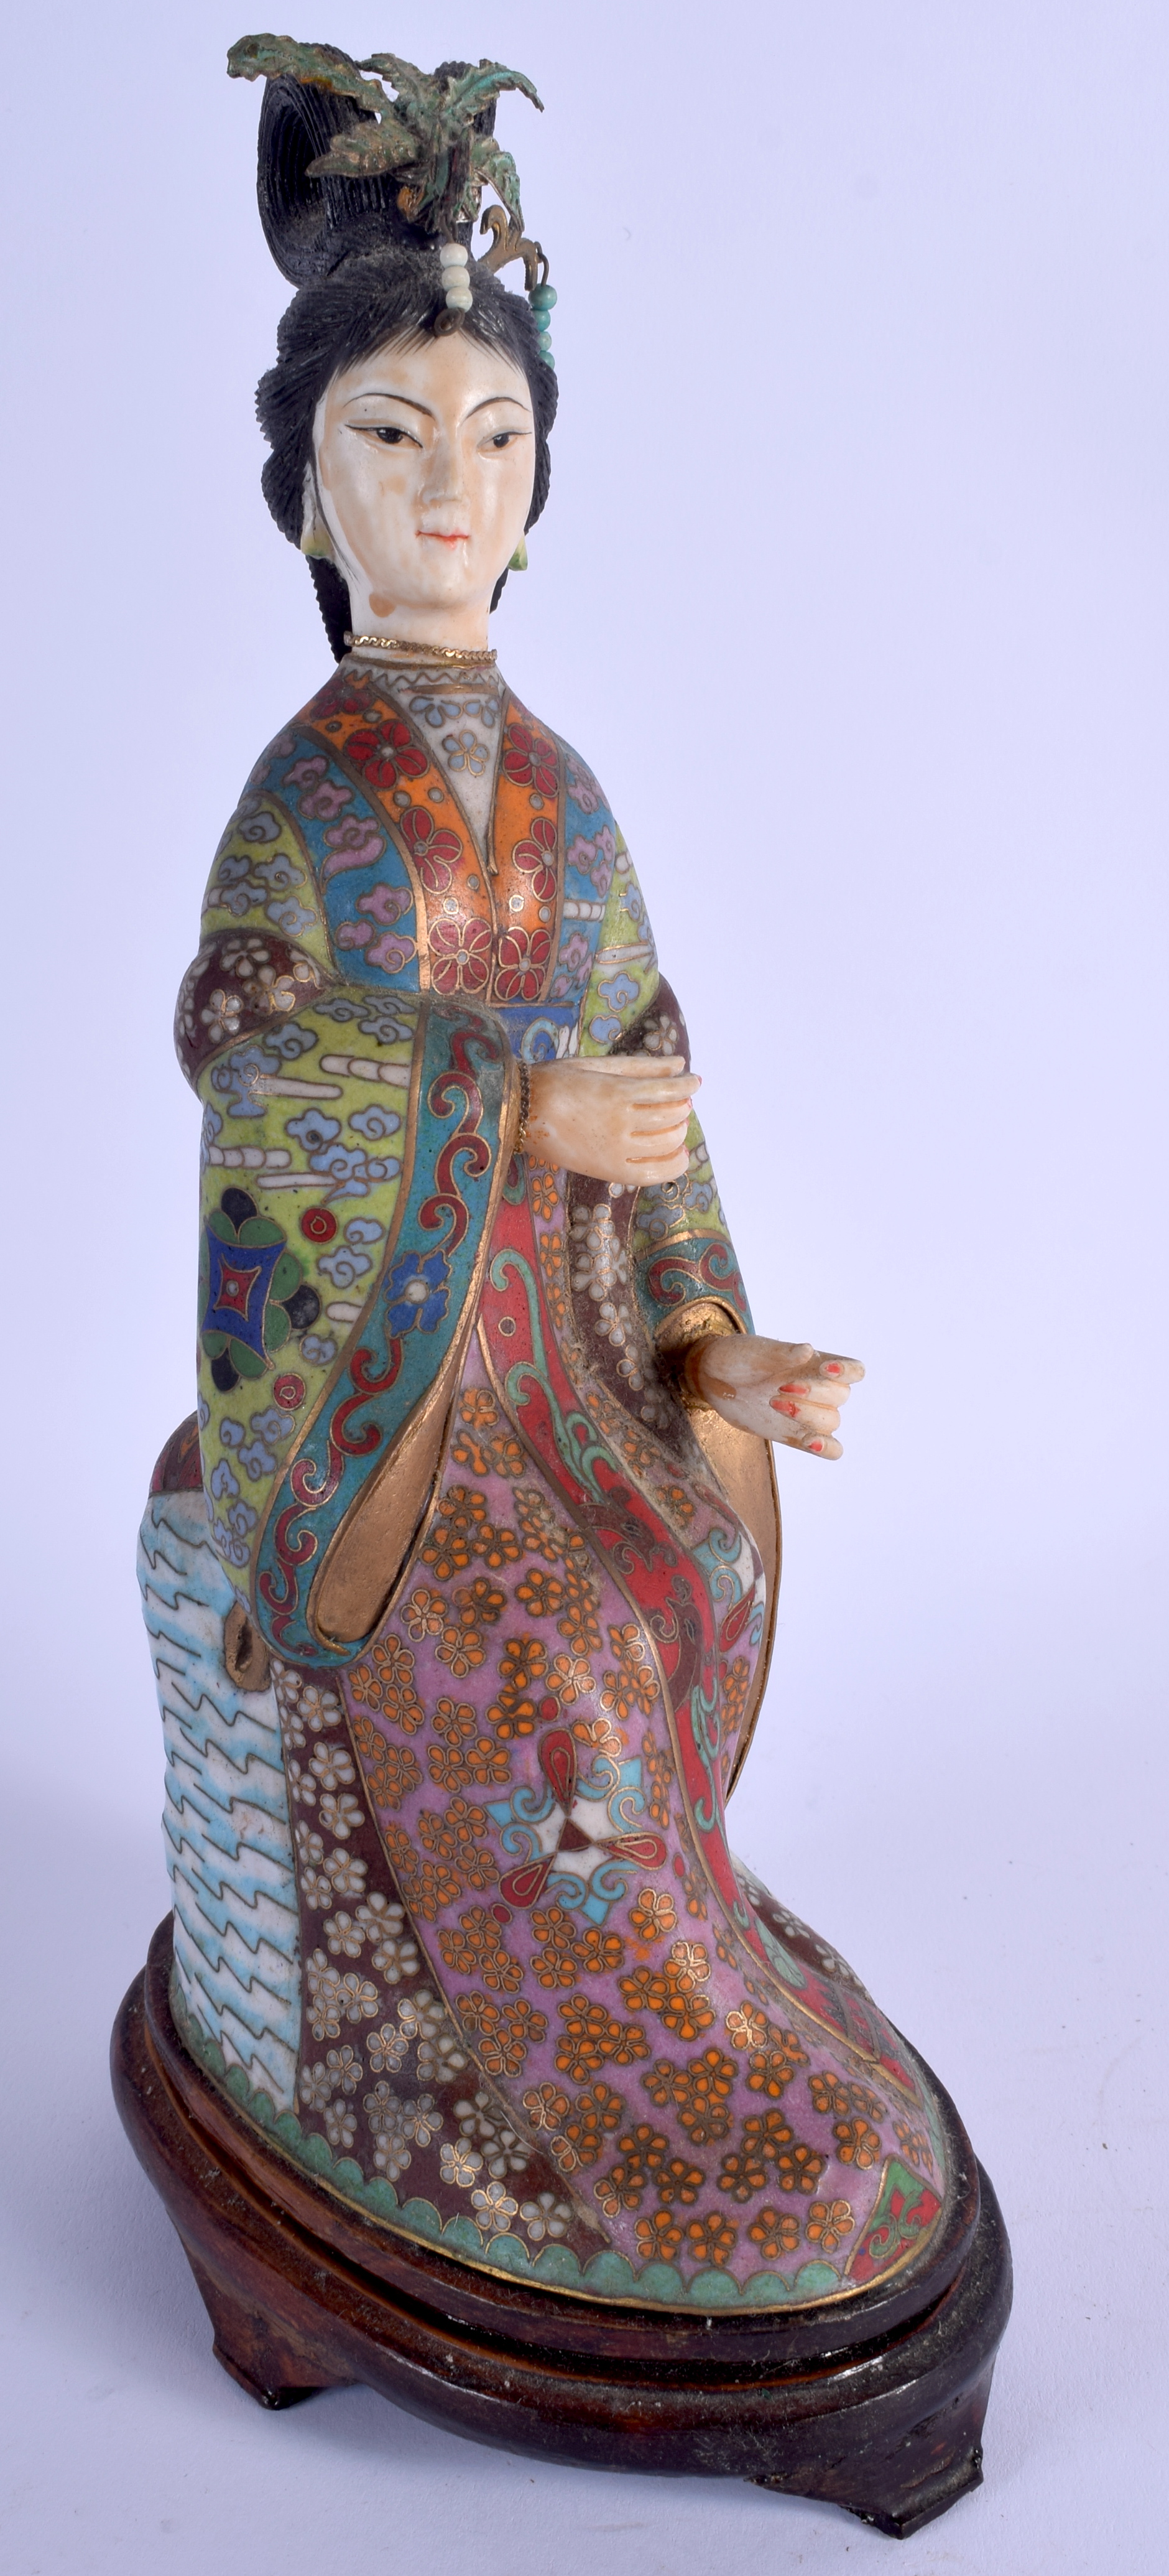 AN EARLY 20TH CENTURY CHINESE CLOISONNE ENAMEL AND IVORY GUANYIN decorated with motifs. 27 cm high.